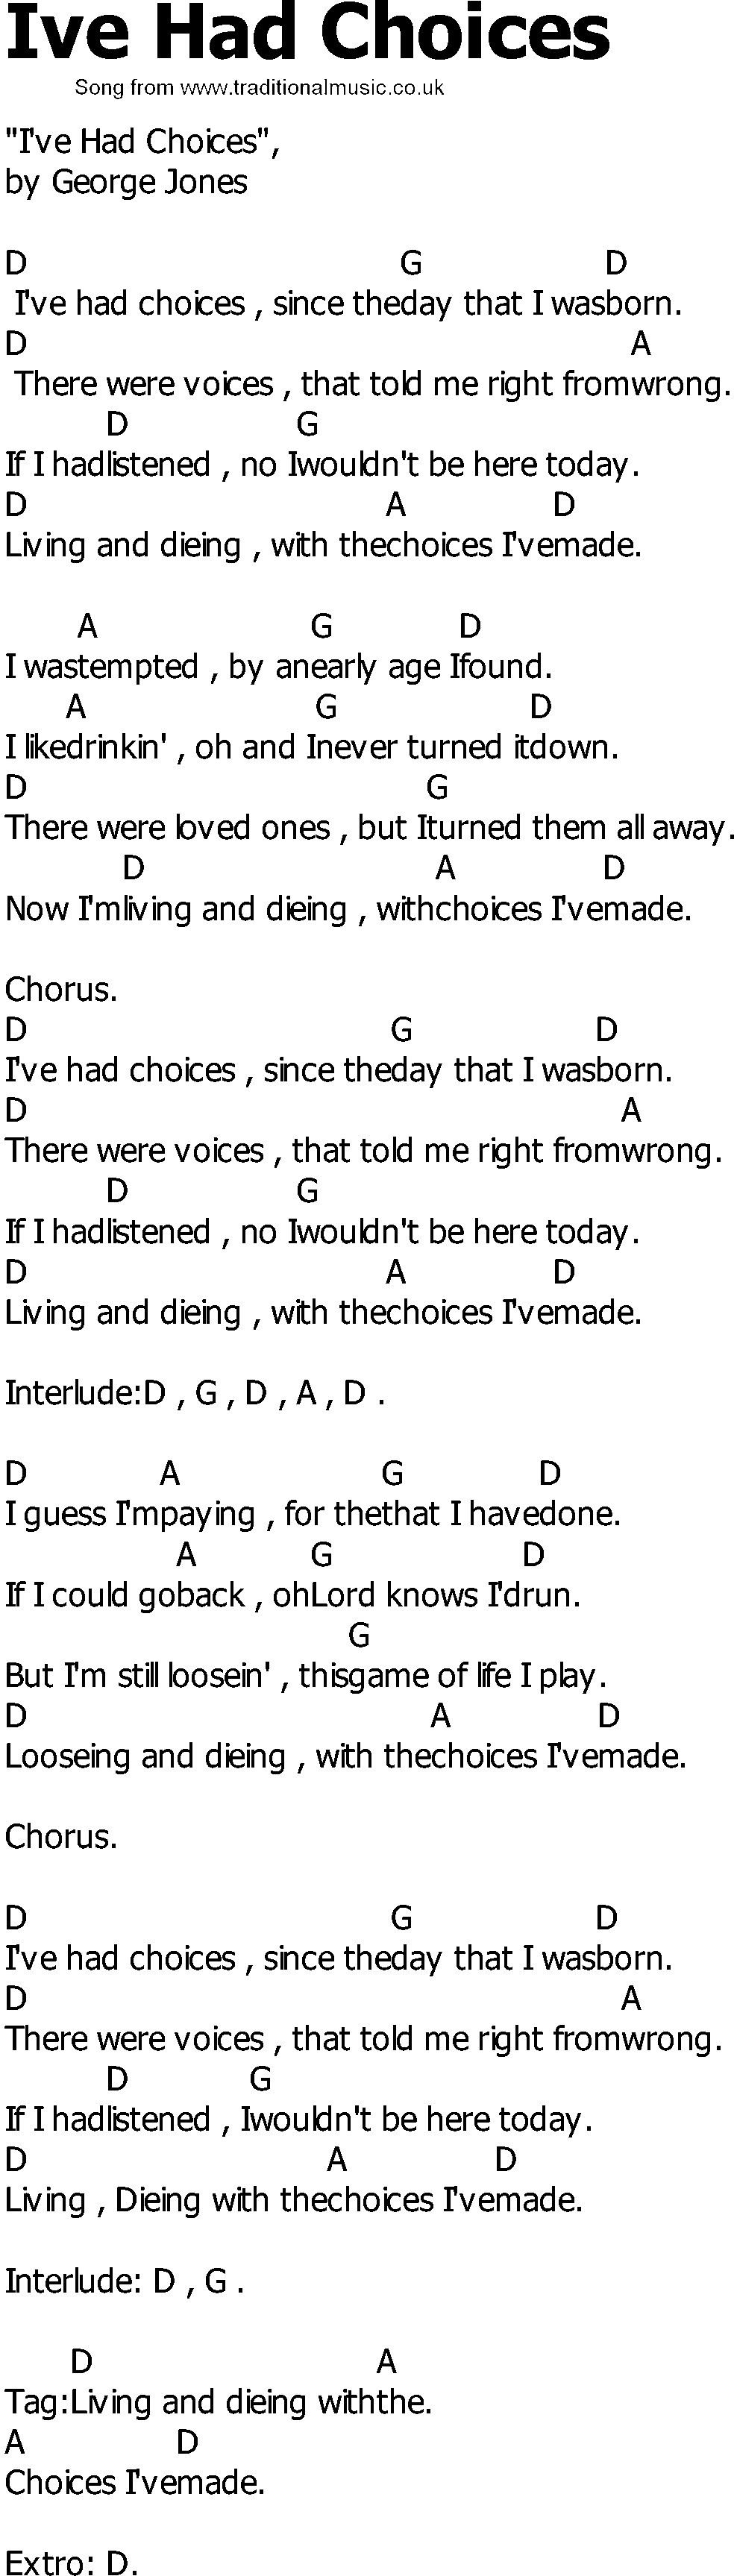 Old Country song lyrics with chords - Ive Had Choices